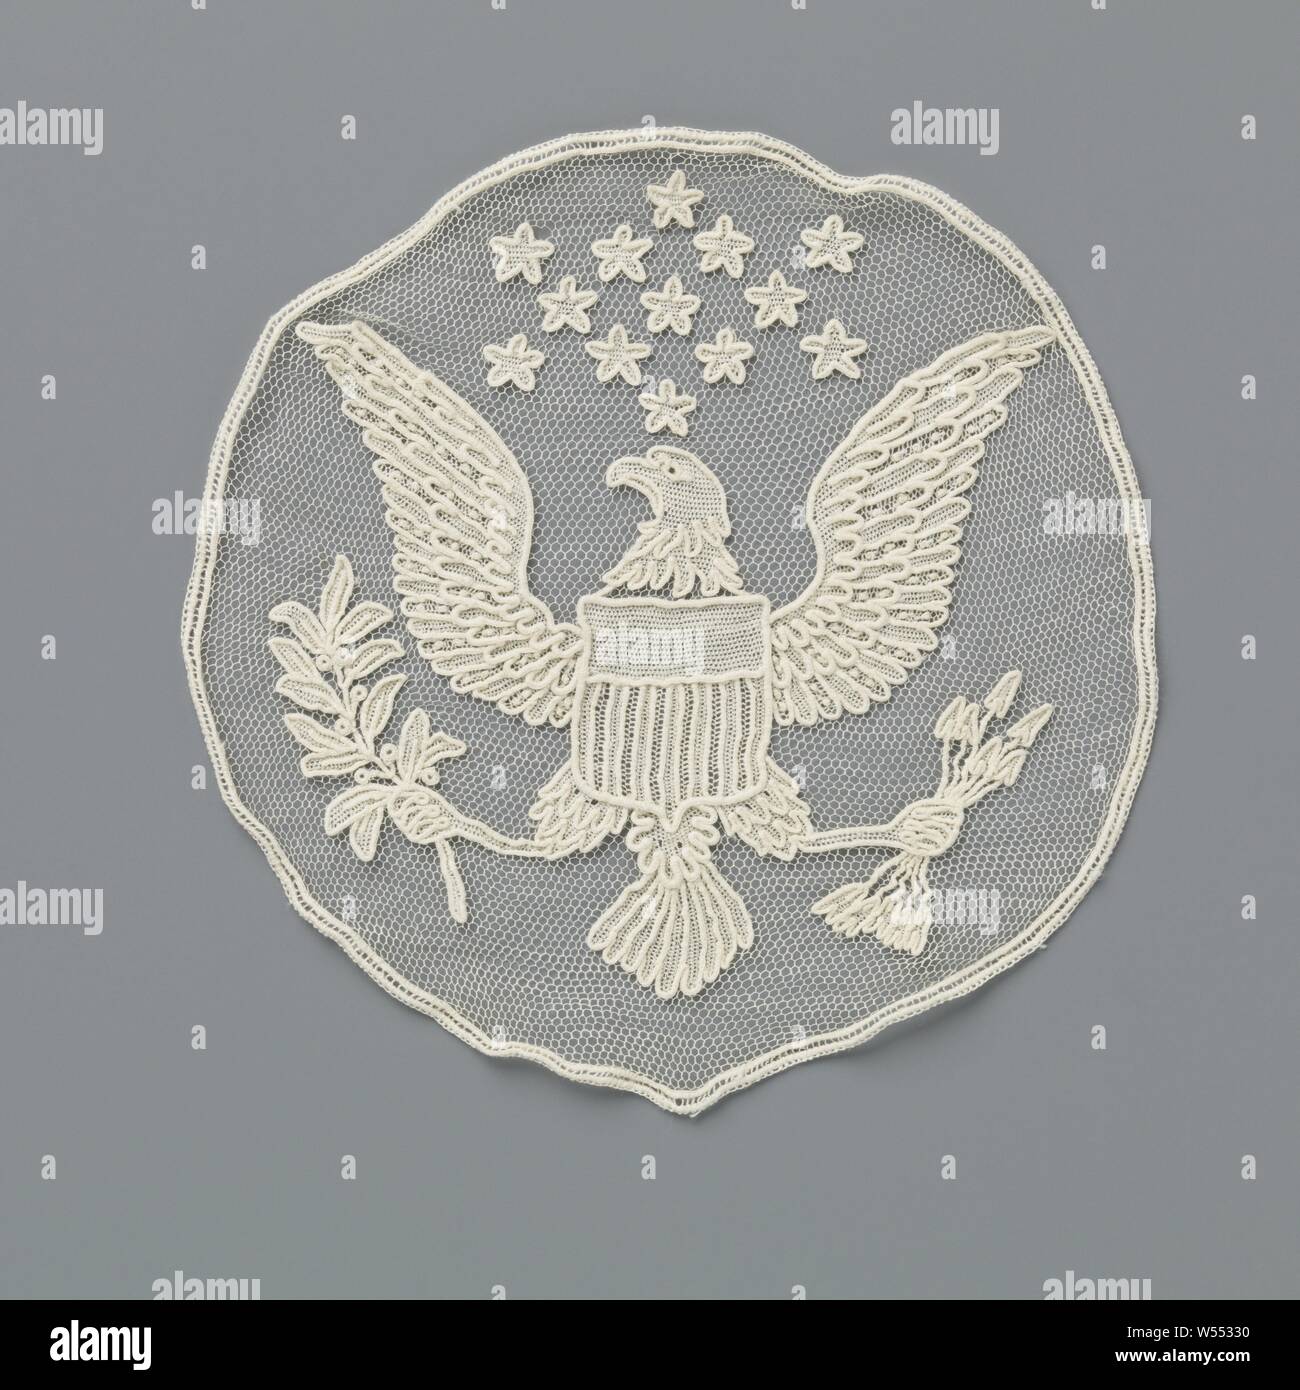 Insert of needle lace with the arms of the US, Insert of natural colored needle lace: war lace. Round model with the arms of the United States of America, with an eagle and stars. The insert was intended for a tablecloth on which the arms of the Allies would stand, with the theme of the Peace of Versailles, armorial bearing, heraldry, anonymous, Belgium, c. 1914 - c. 1918, linen (material), d 14 cm Stock Photo